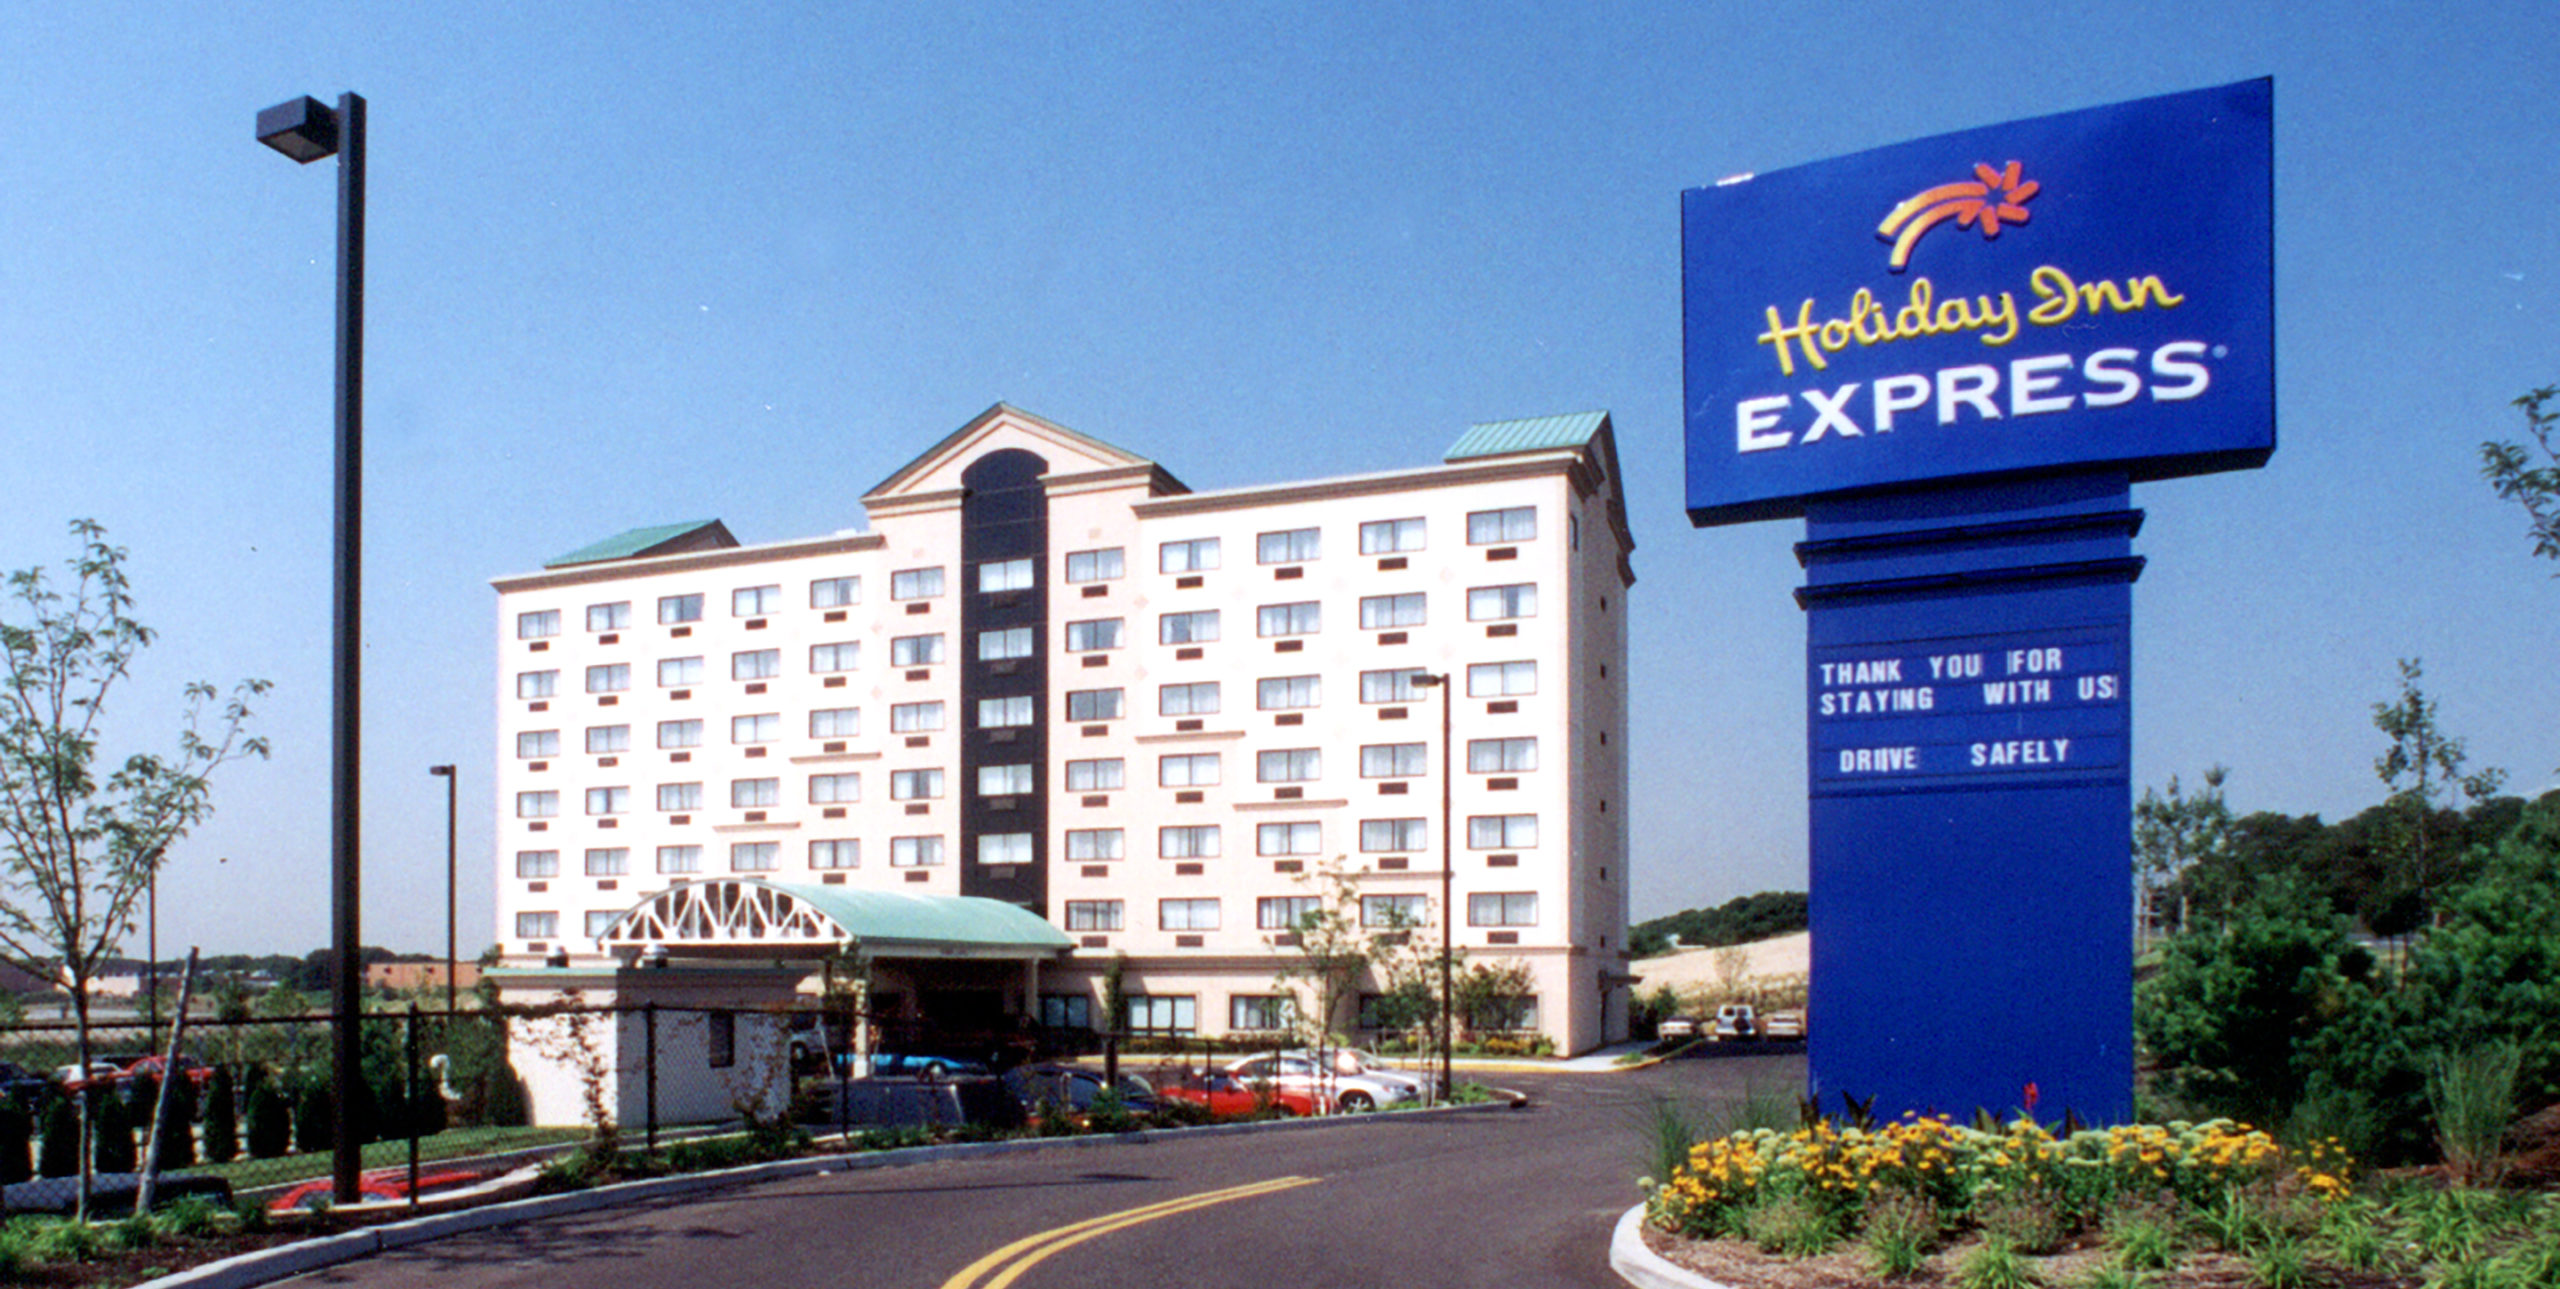 Front entrance to Holiday Inn Express at 2050 Express Dr S, Hauppauge